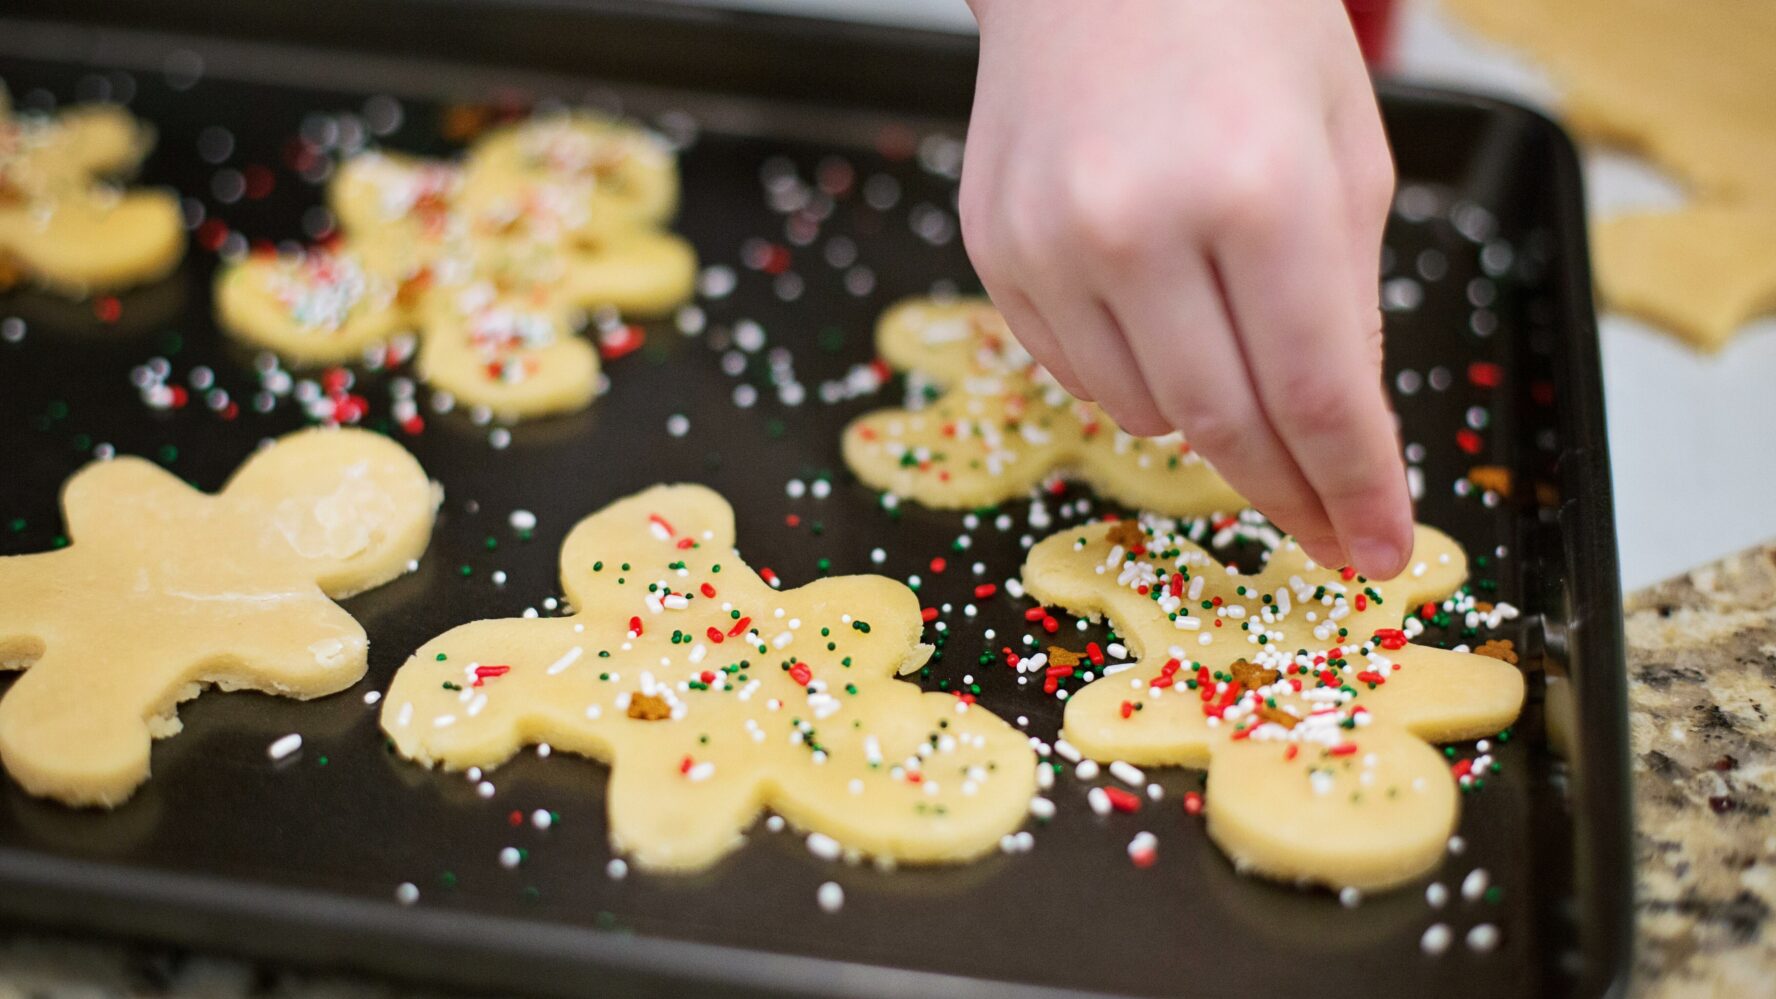 Homemade gingerbread men covered with colourful sprinkles